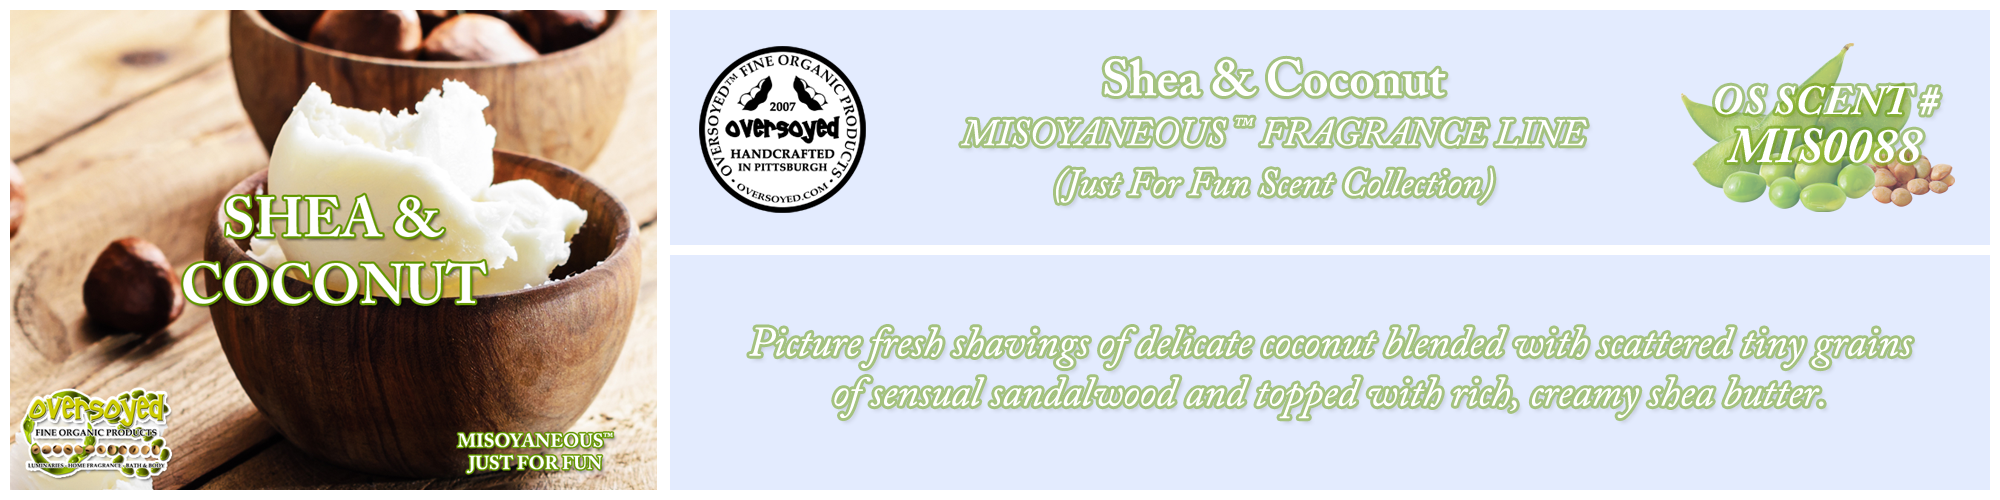 Shea & Coconut Handcrafted Products Collection